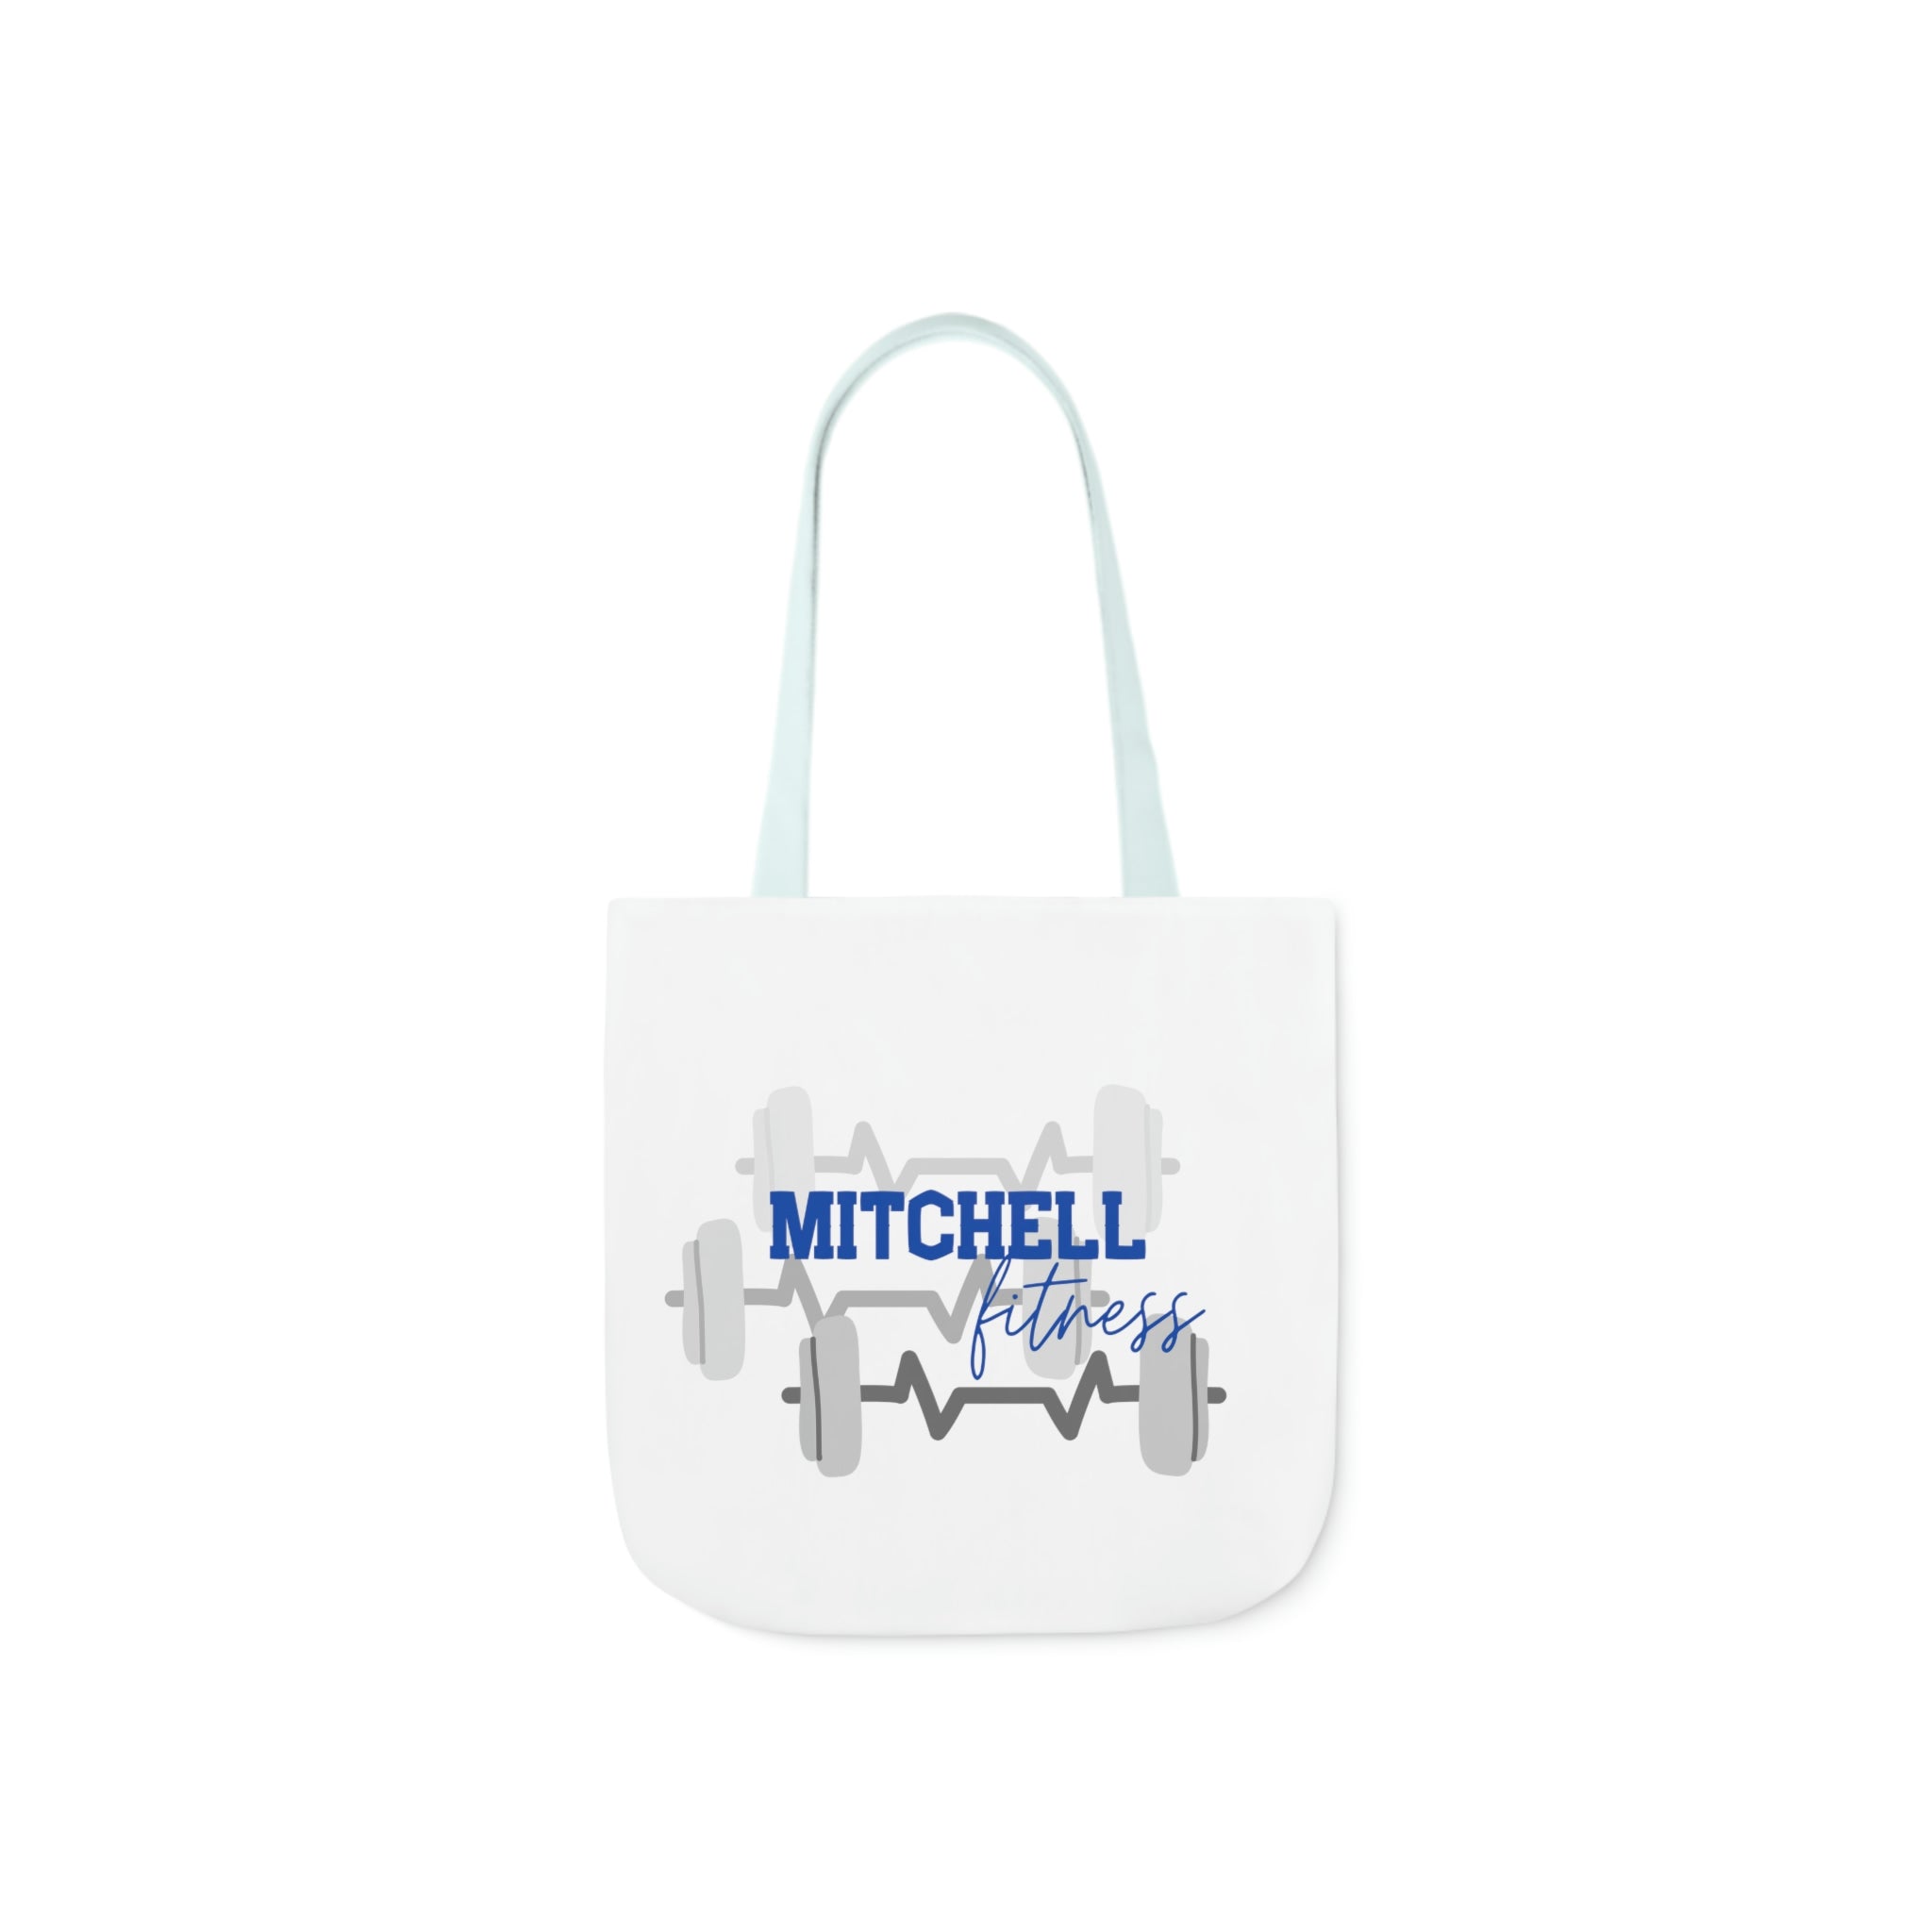 Mitchell Fitness Canvas Tote Bag (blue letters)